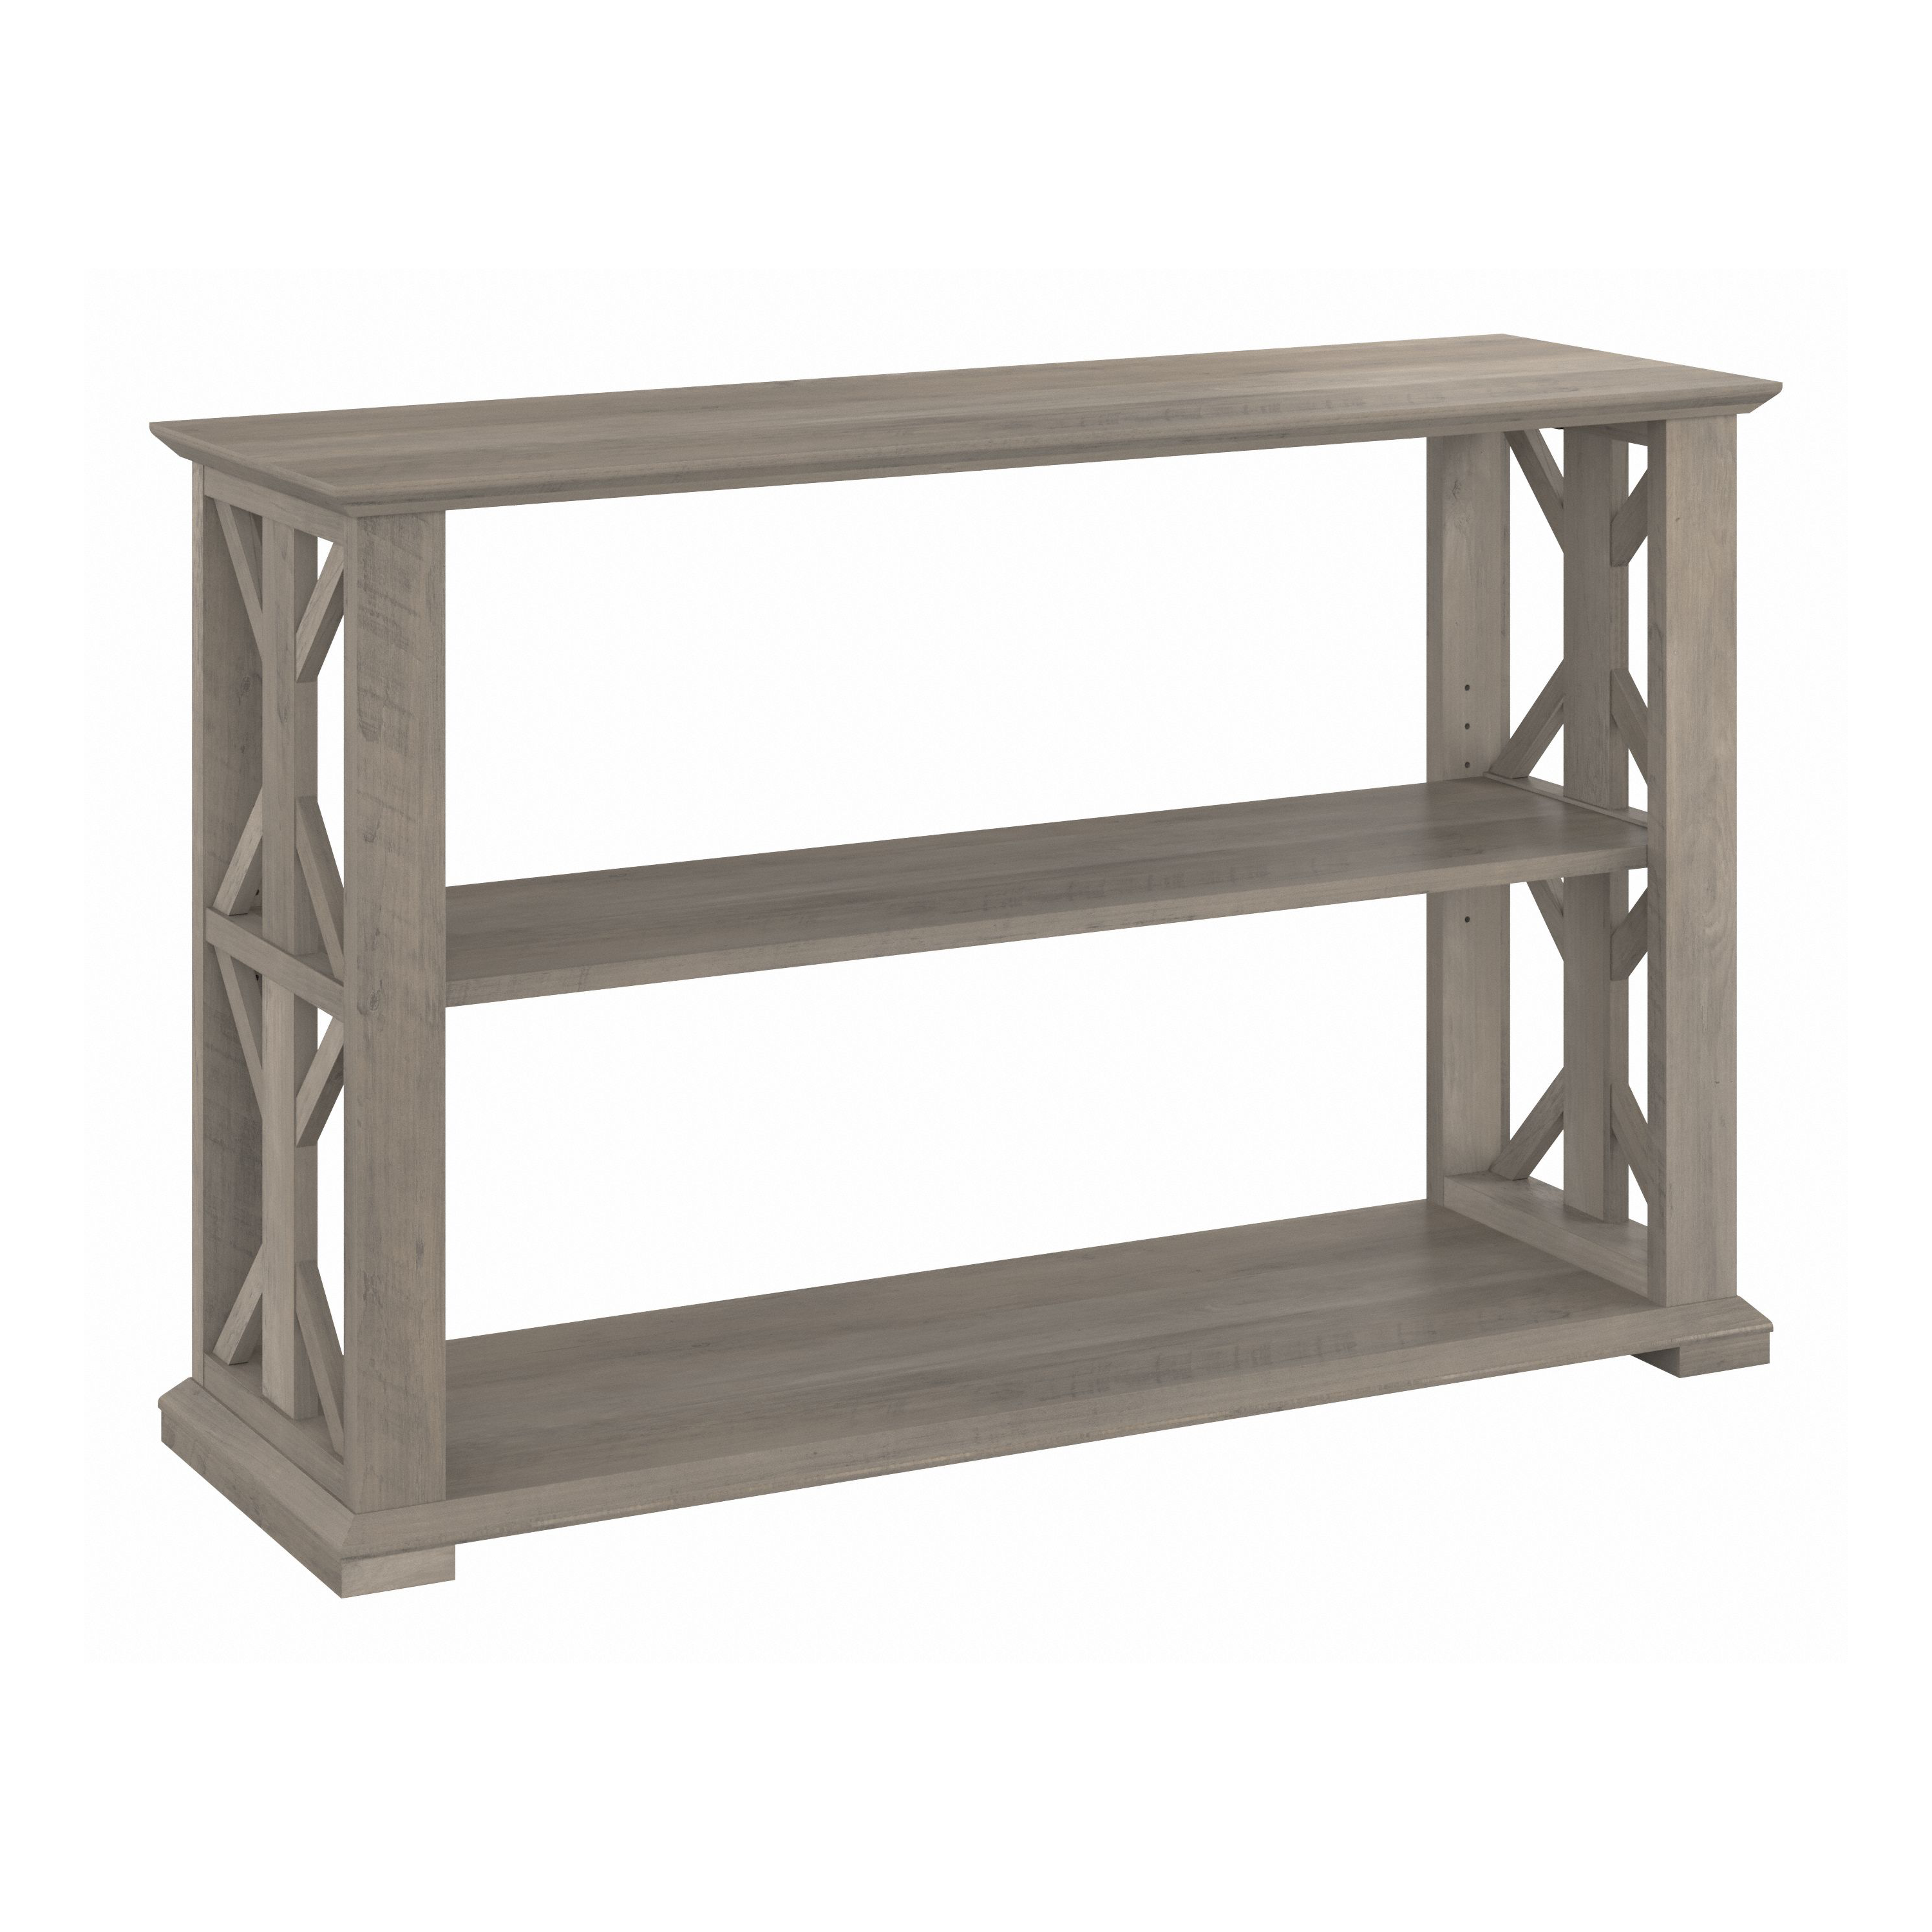 Shop Bush Furniture Homestead Console Table with Shelves 02 HOT248DG-03 #color_driftwood gray